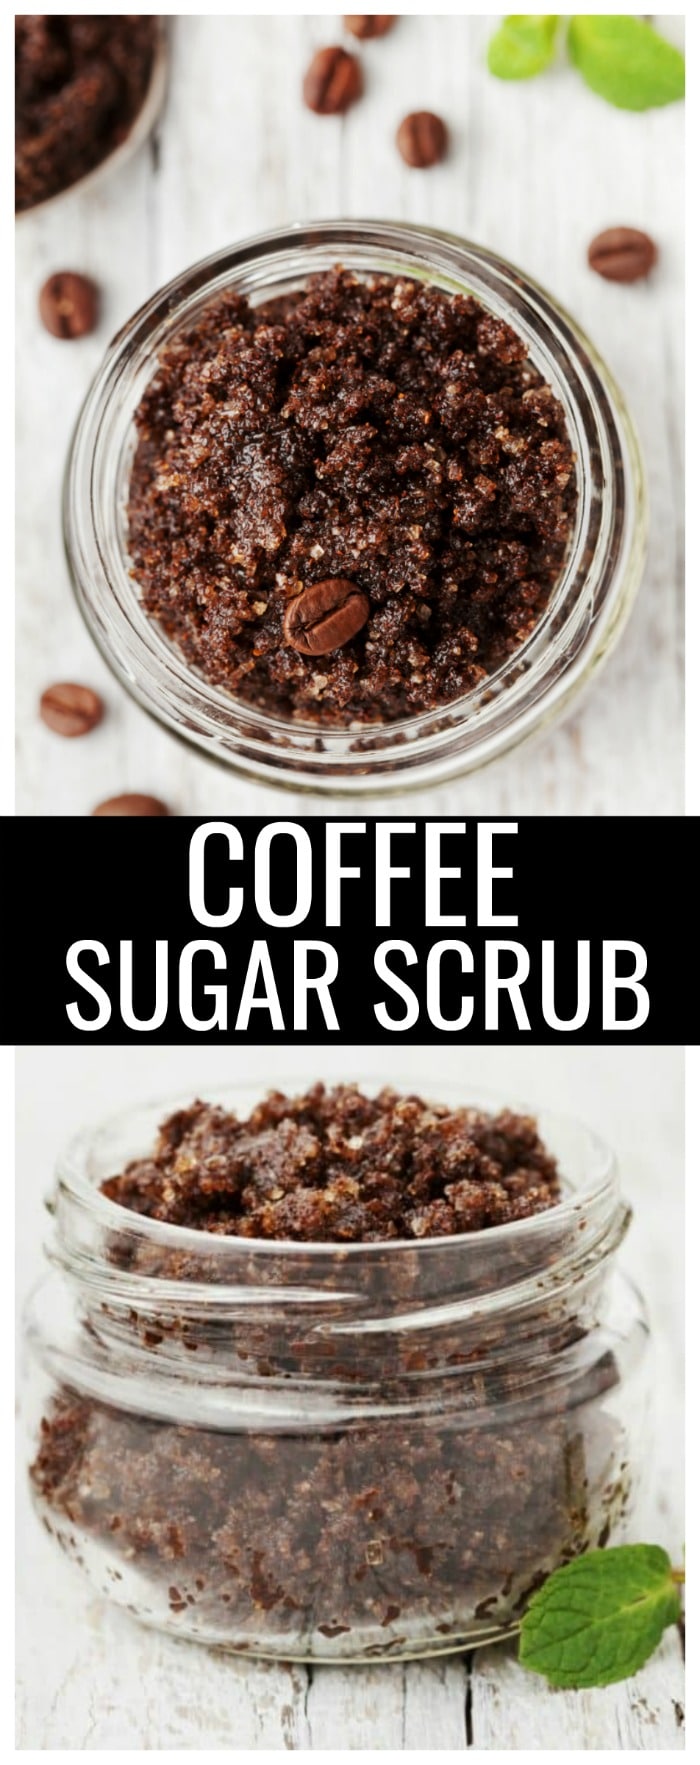 Don't settle for dry, cracked, itchy skin. If your skin needs a little TLC and you can handle a little DIY, then try this easy coffee body scrub recipe for soft, smooth skin! #bodyscrubs #bodyscrubrecips #diybeauty #beautyrecipes #sugarscrubs #sugarscrubrecipes #beautyrecipe #coffeescrub